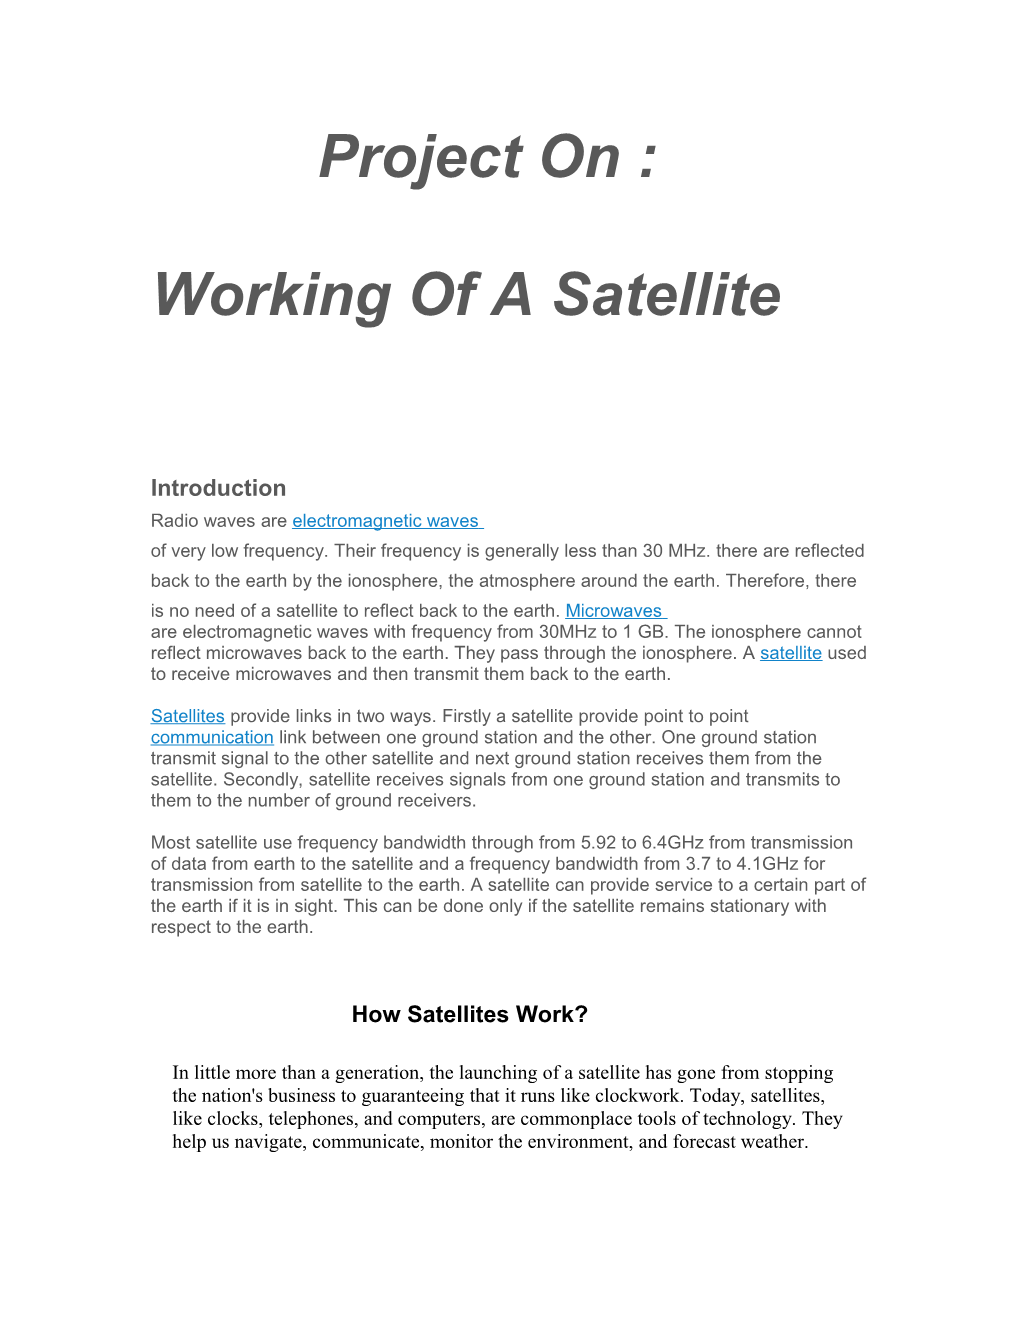 Working of a Satellite